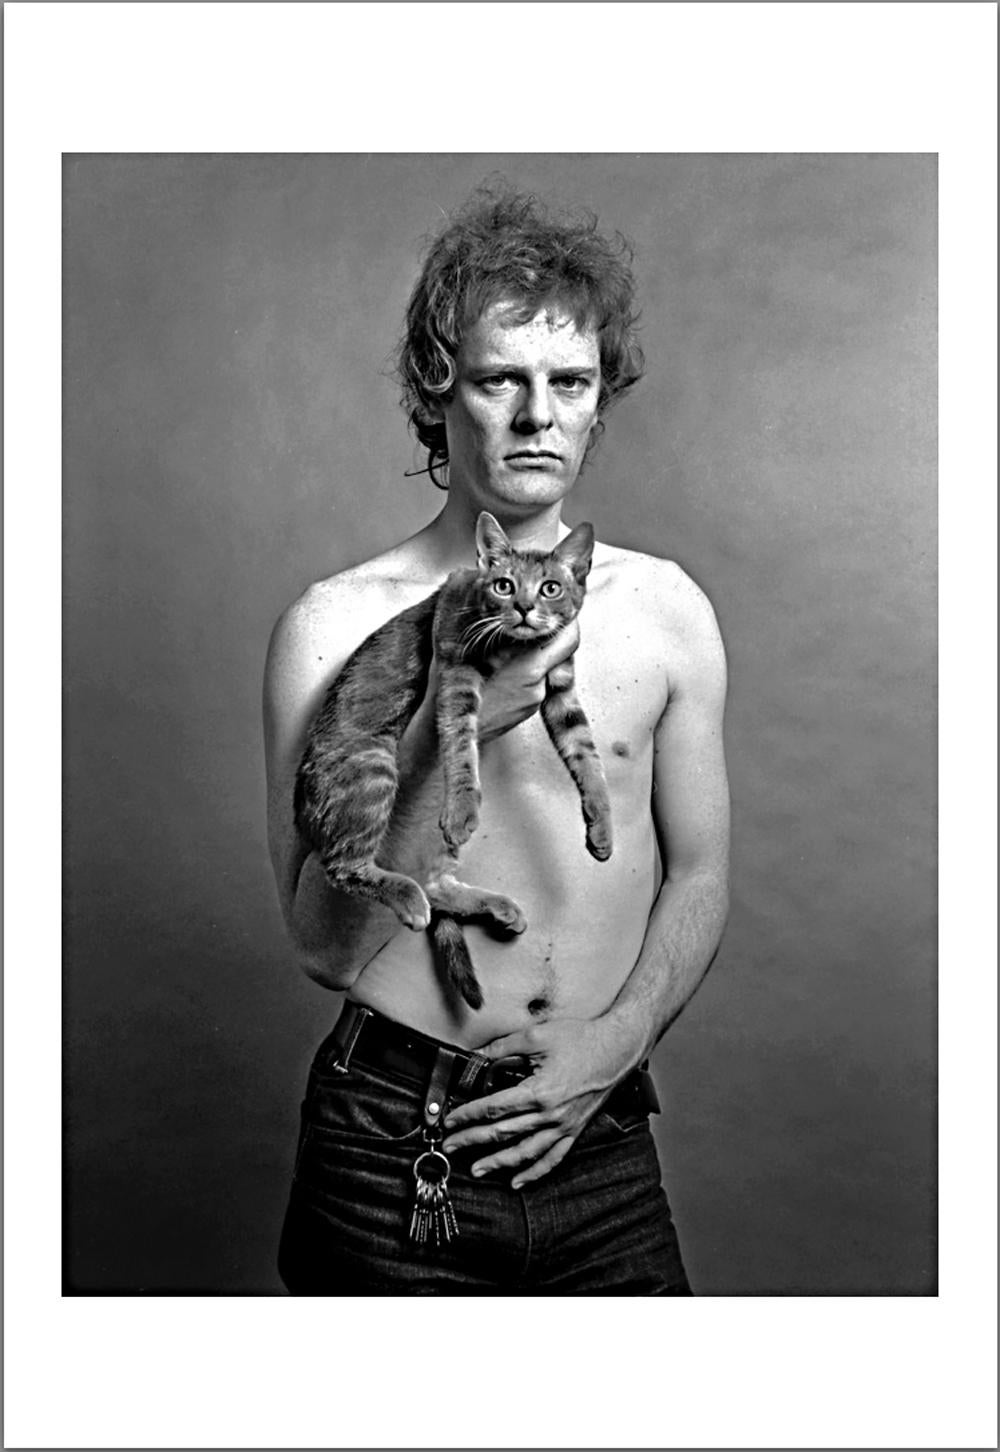 Andy Warhol & the Superstars - Limited Edition Portfolio of 10 Photographs 9